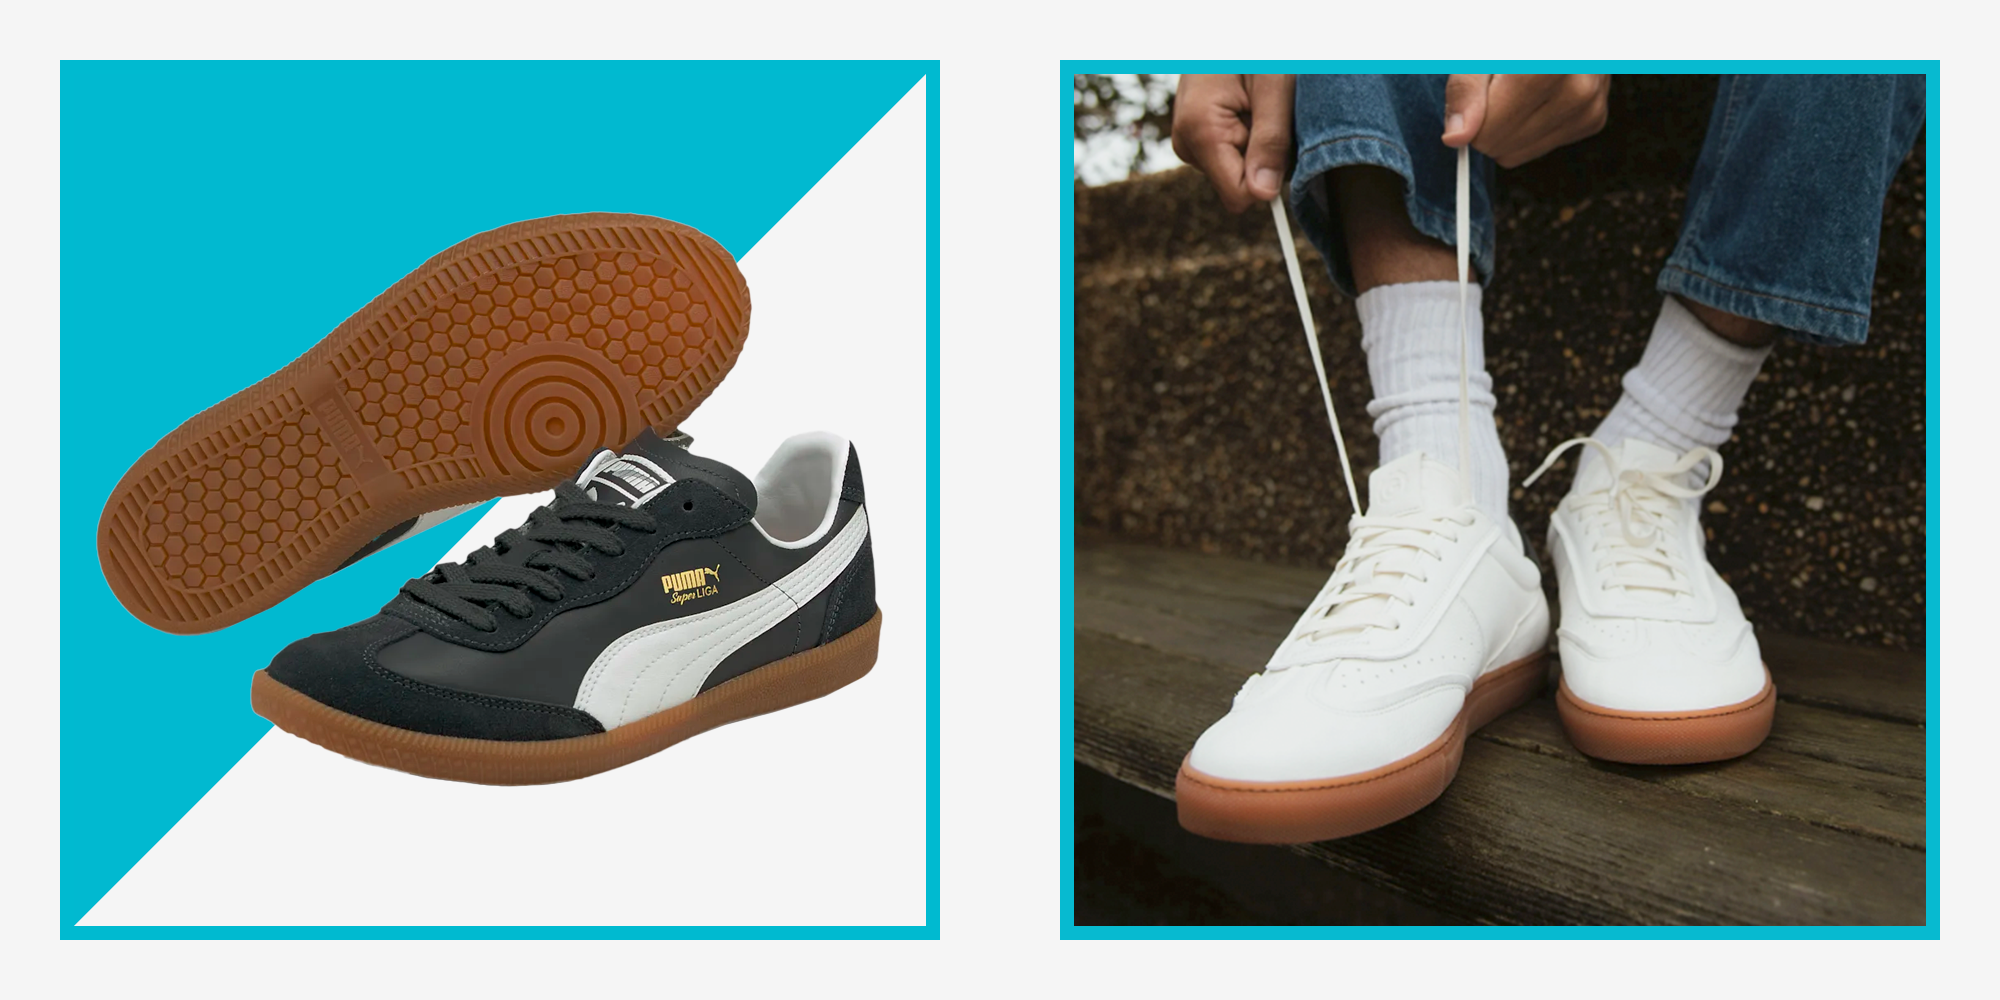 Coolest Retro Sneakers To Get Now - Cool Retro-Inspired Sneakers